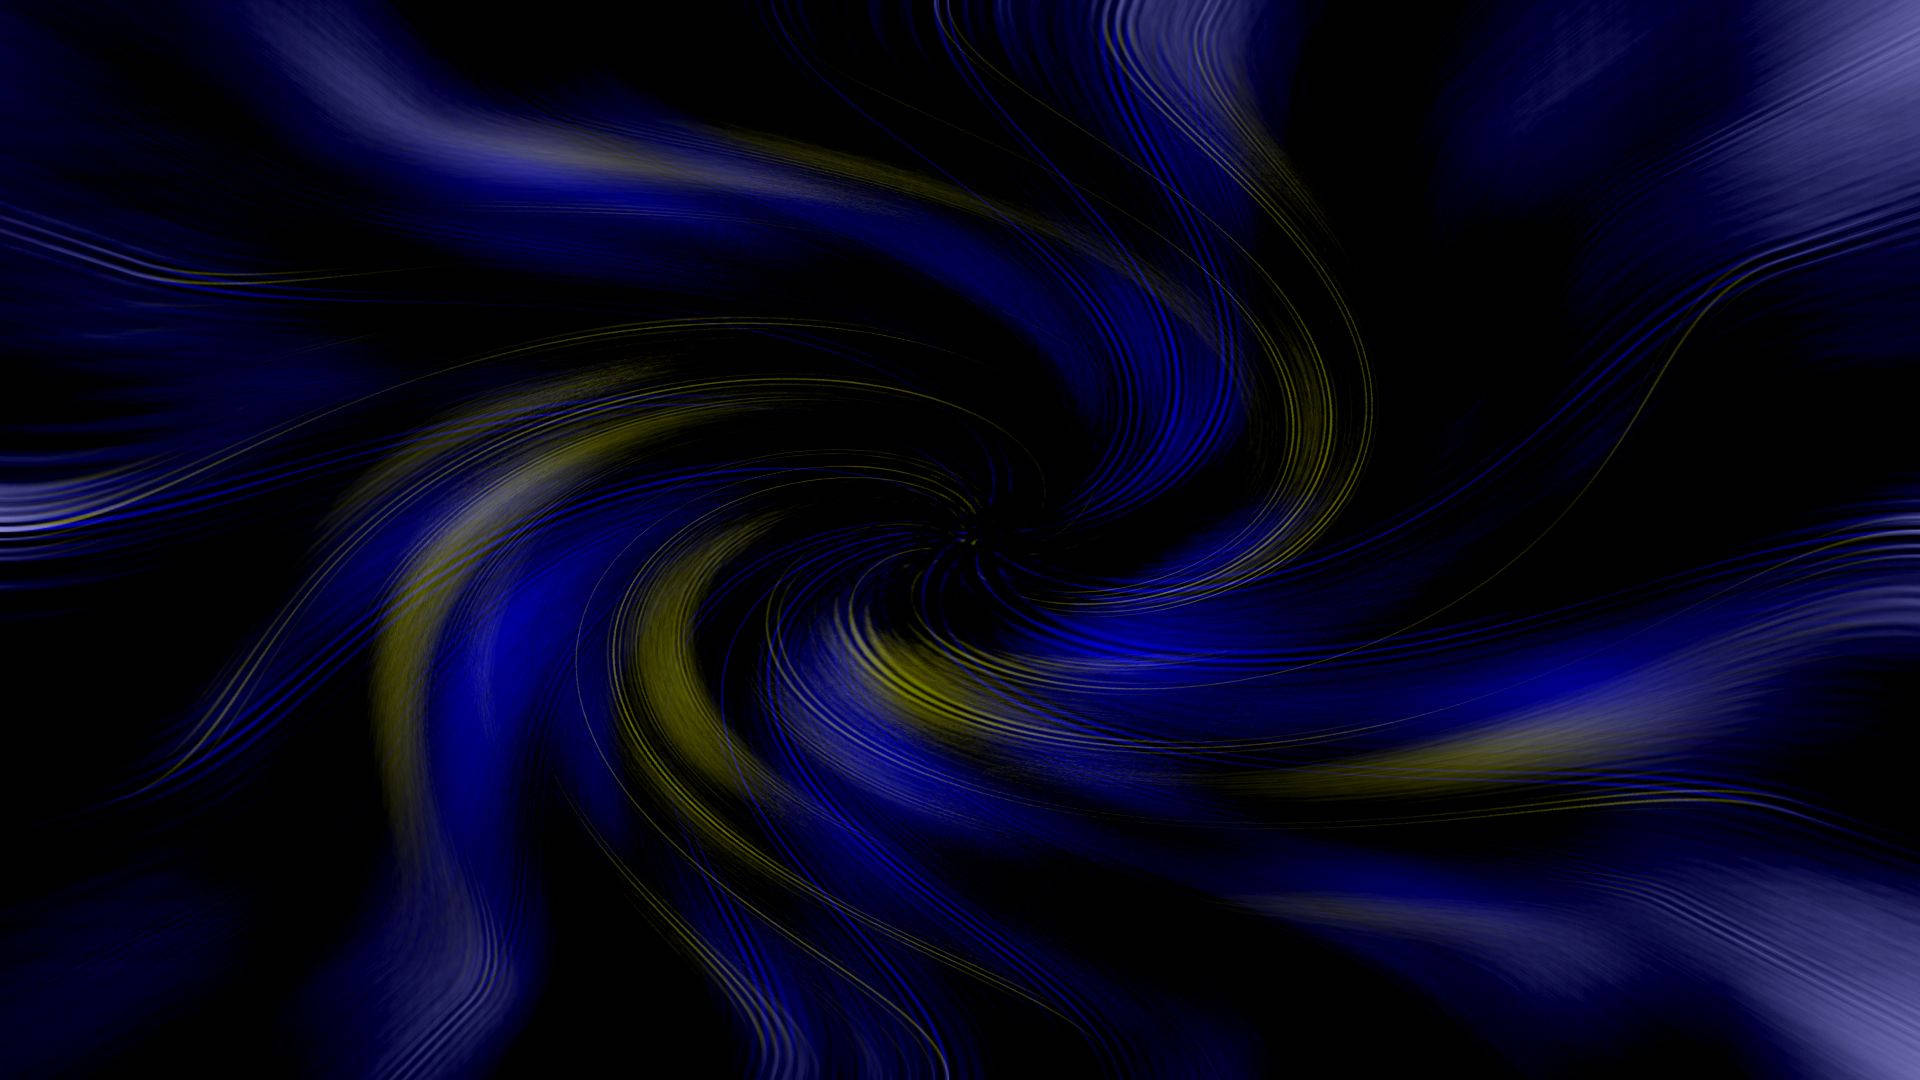 Blue And Gold Swirl Background